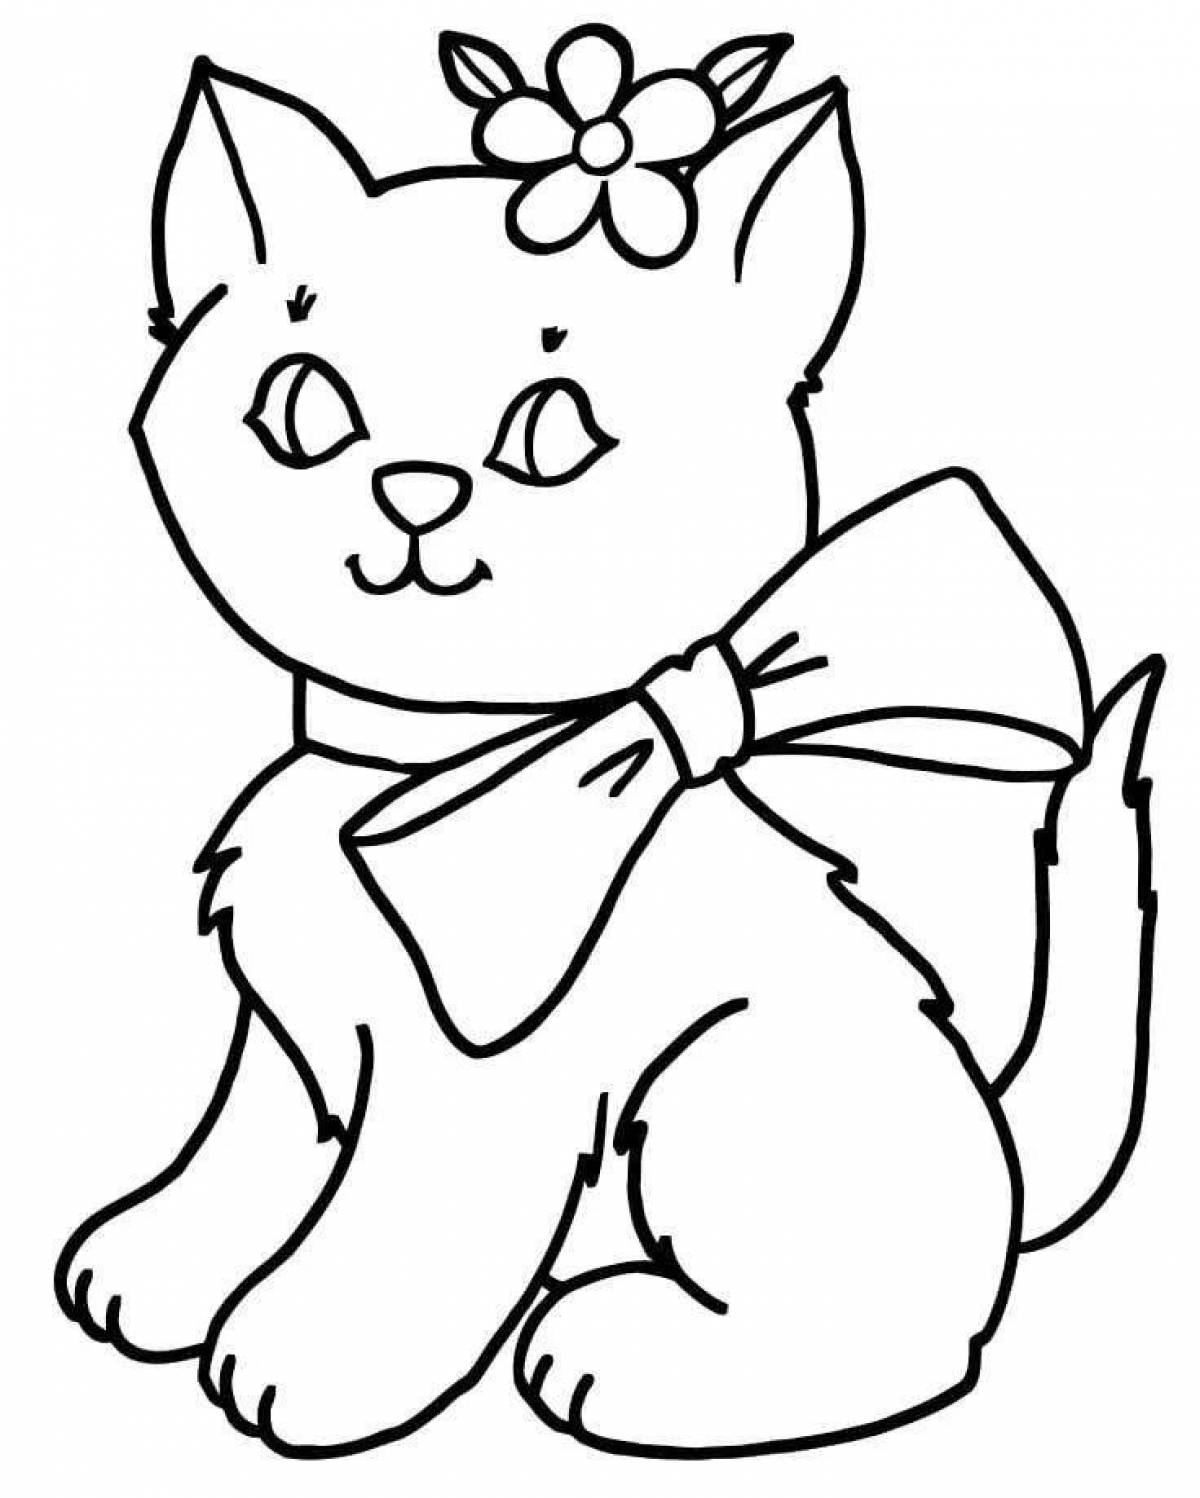 Kitten with a bow #2